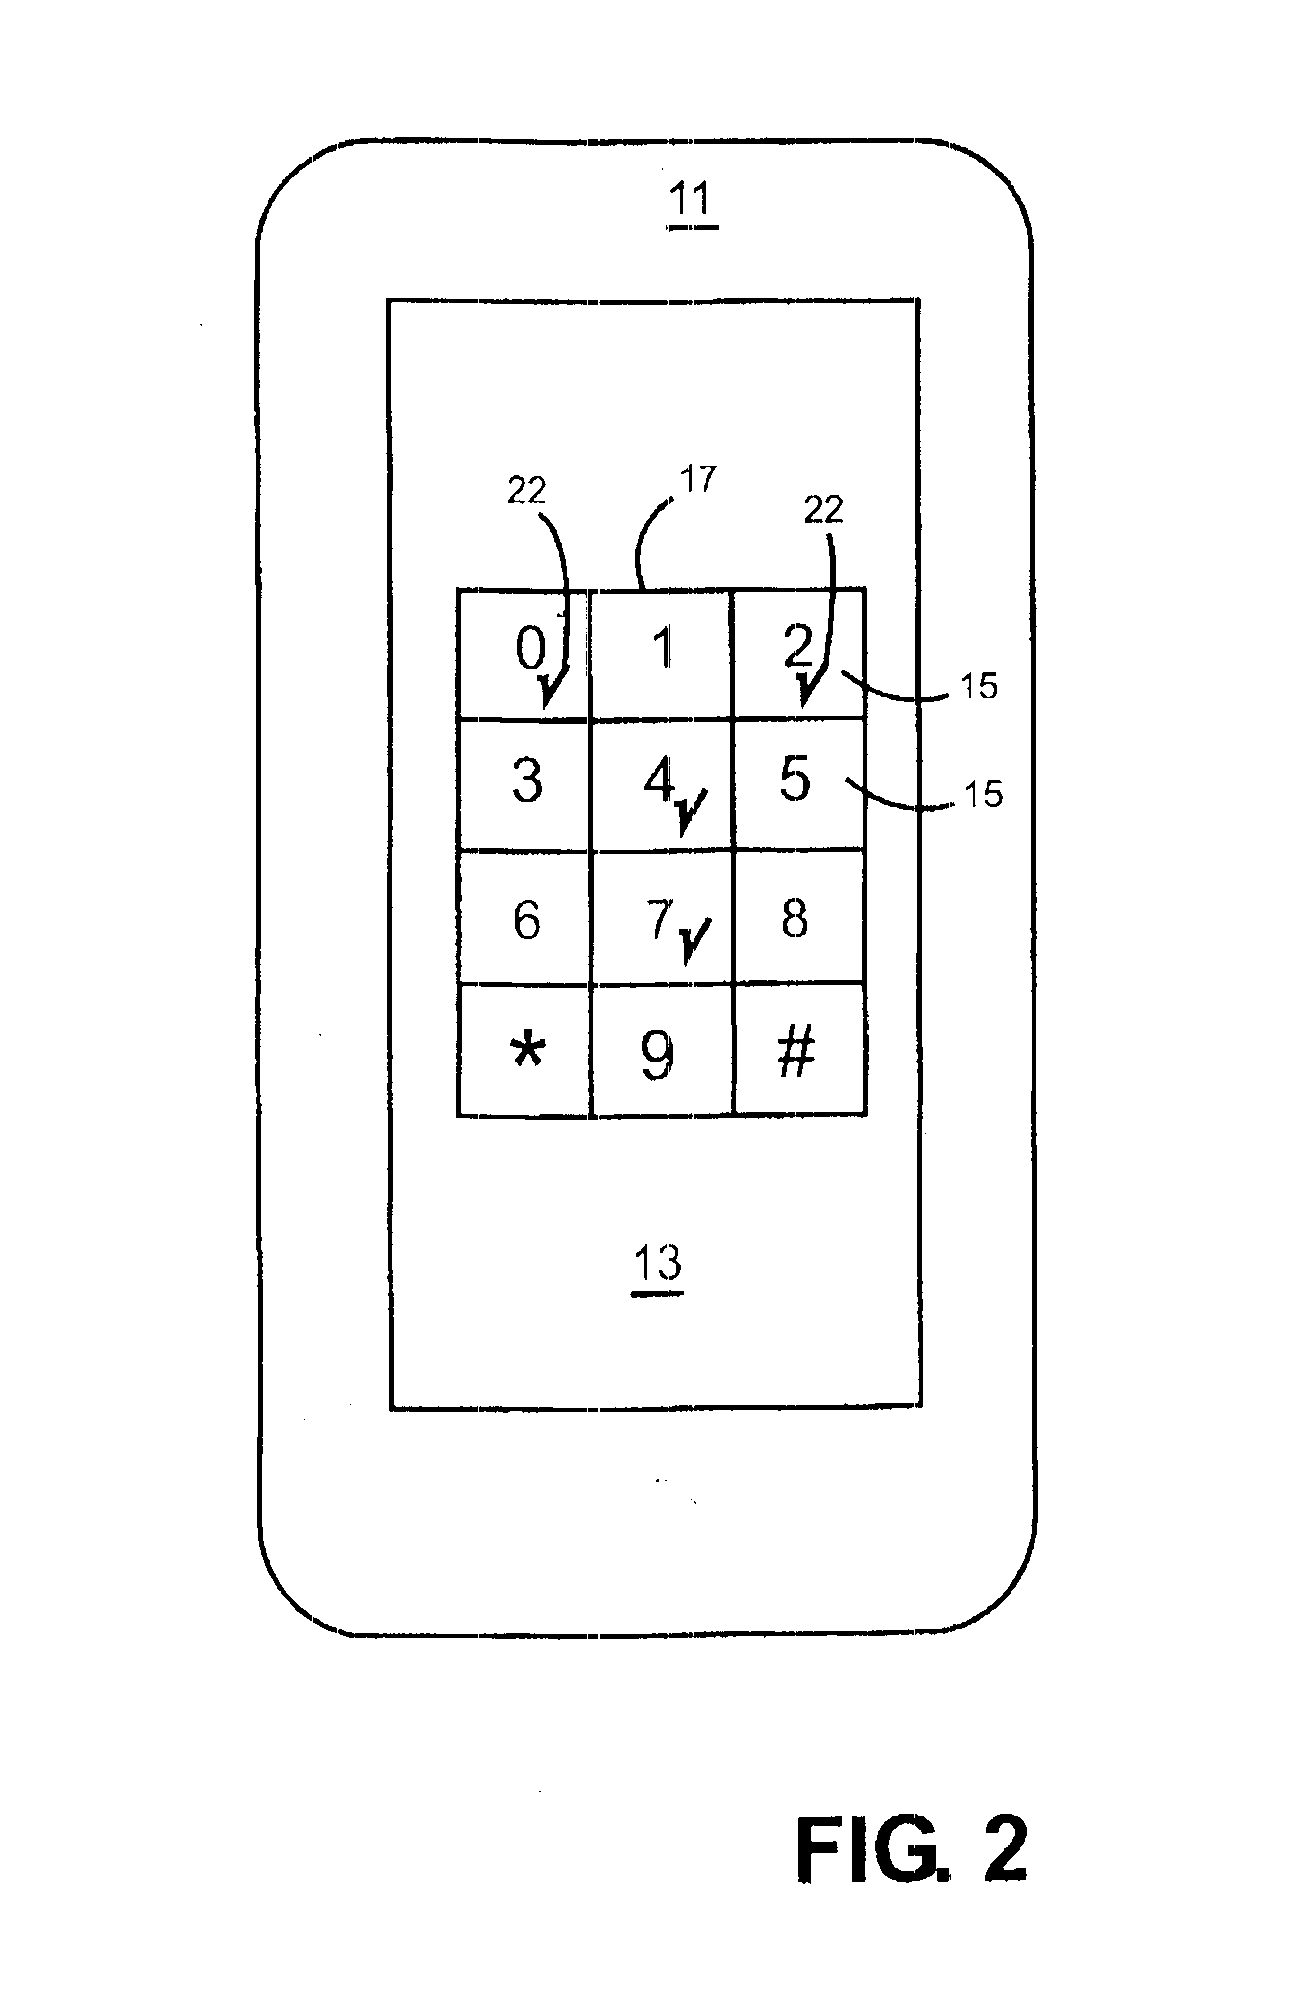 Preventing the detection and theft of user entry alphanumeric security codes on computer touch screen keypads